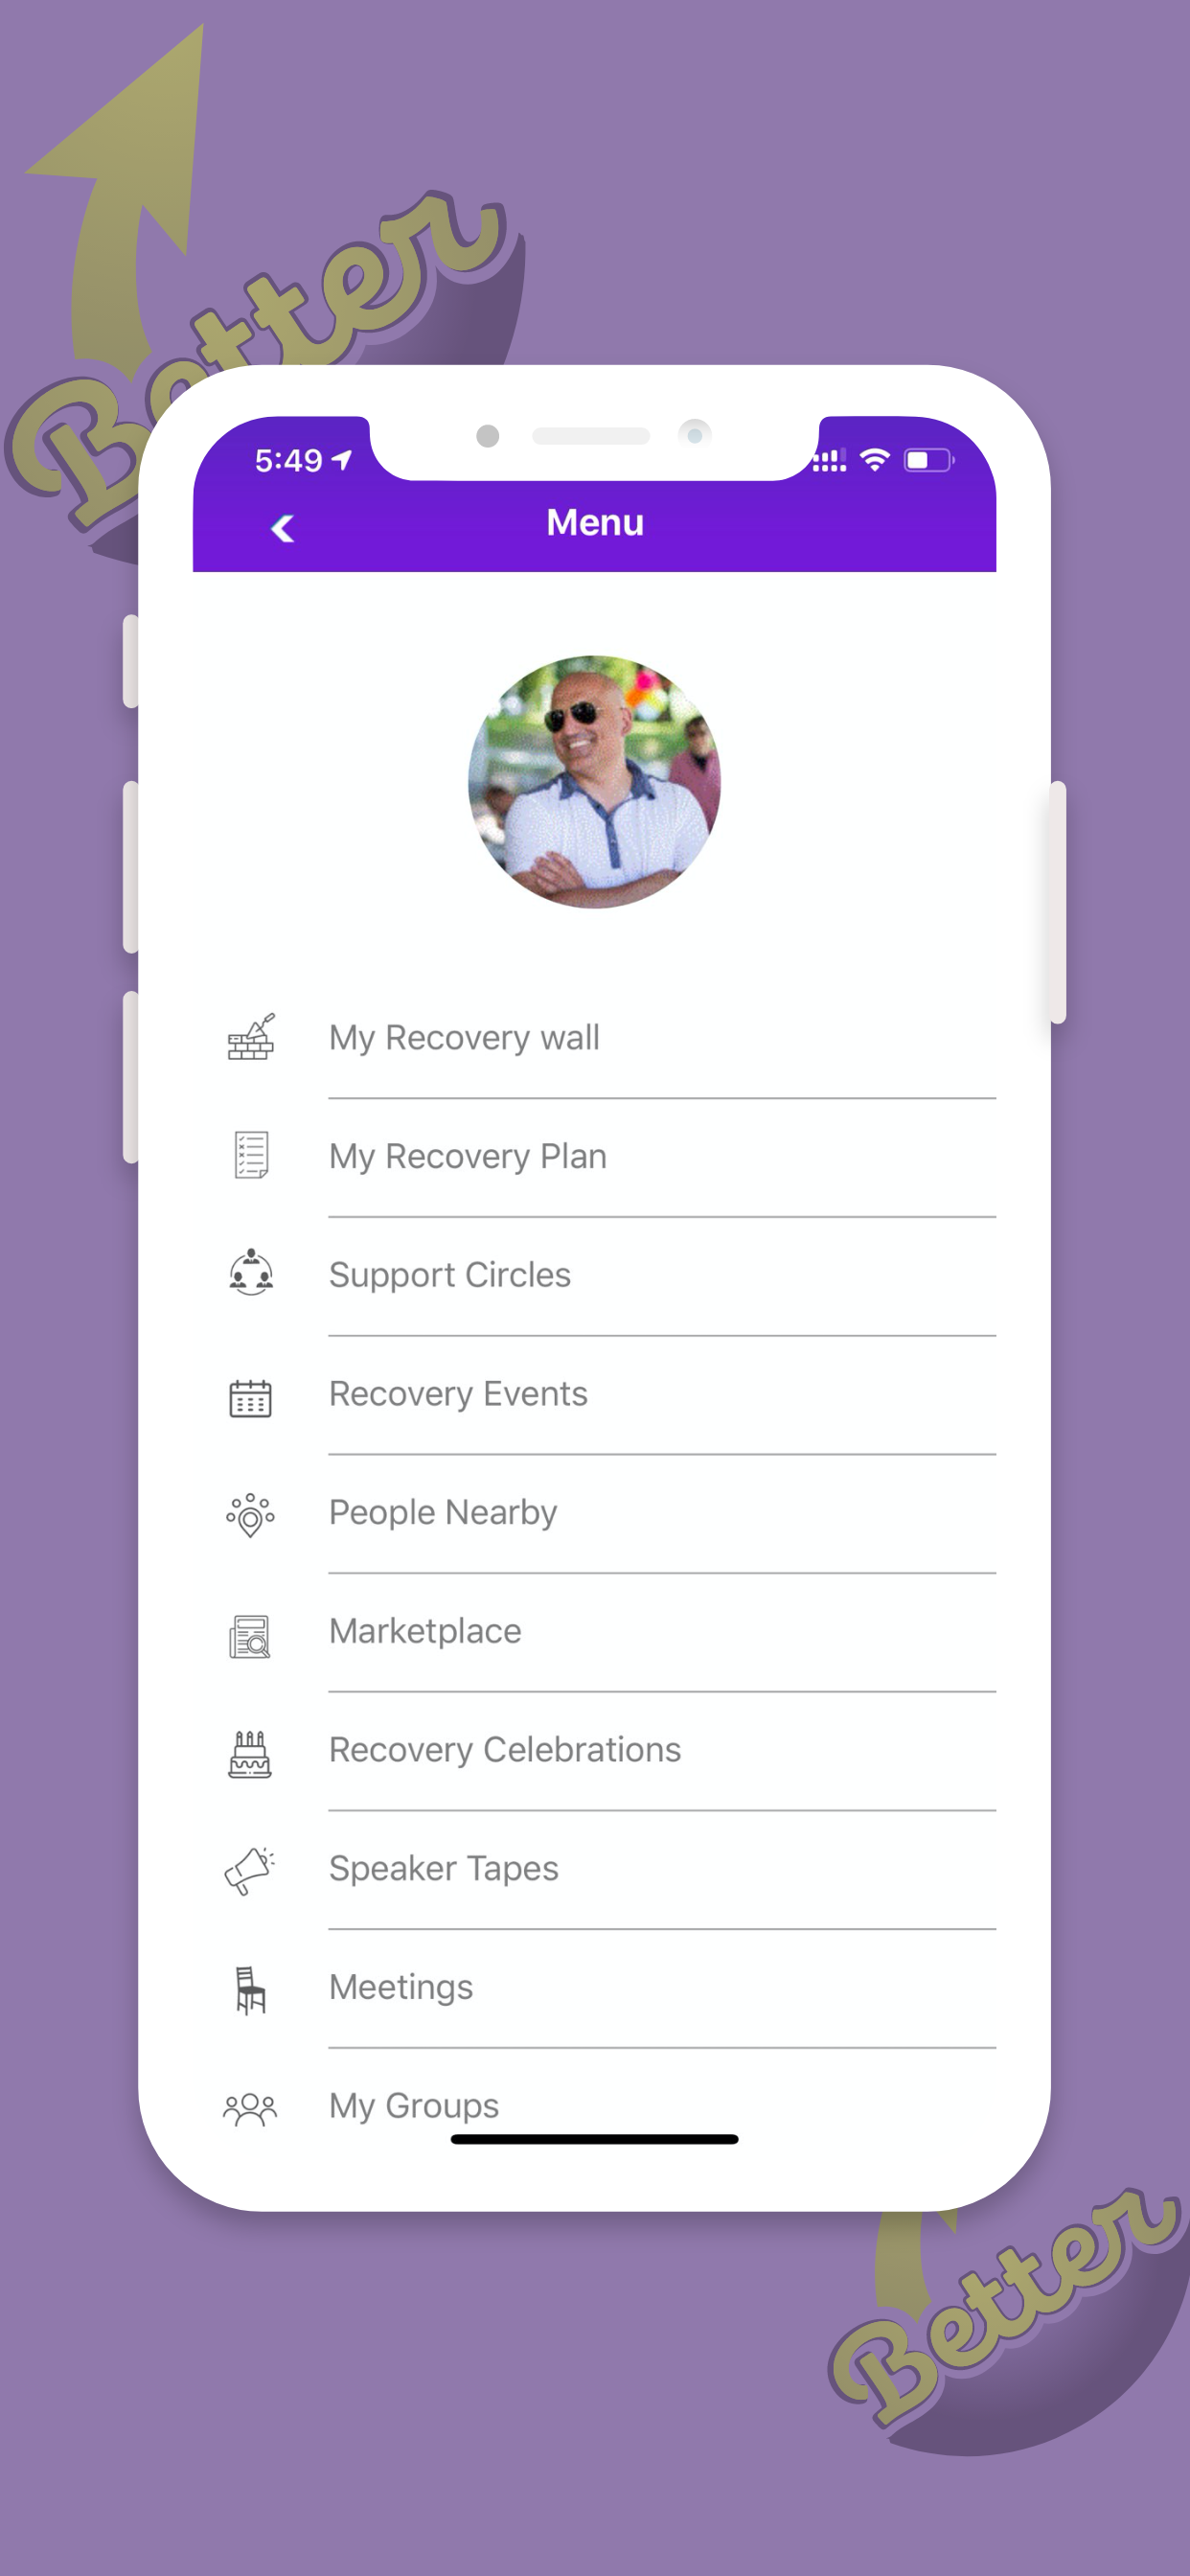 overdose prevention app, 12 step recovery app, stop overdoses, recovery app 